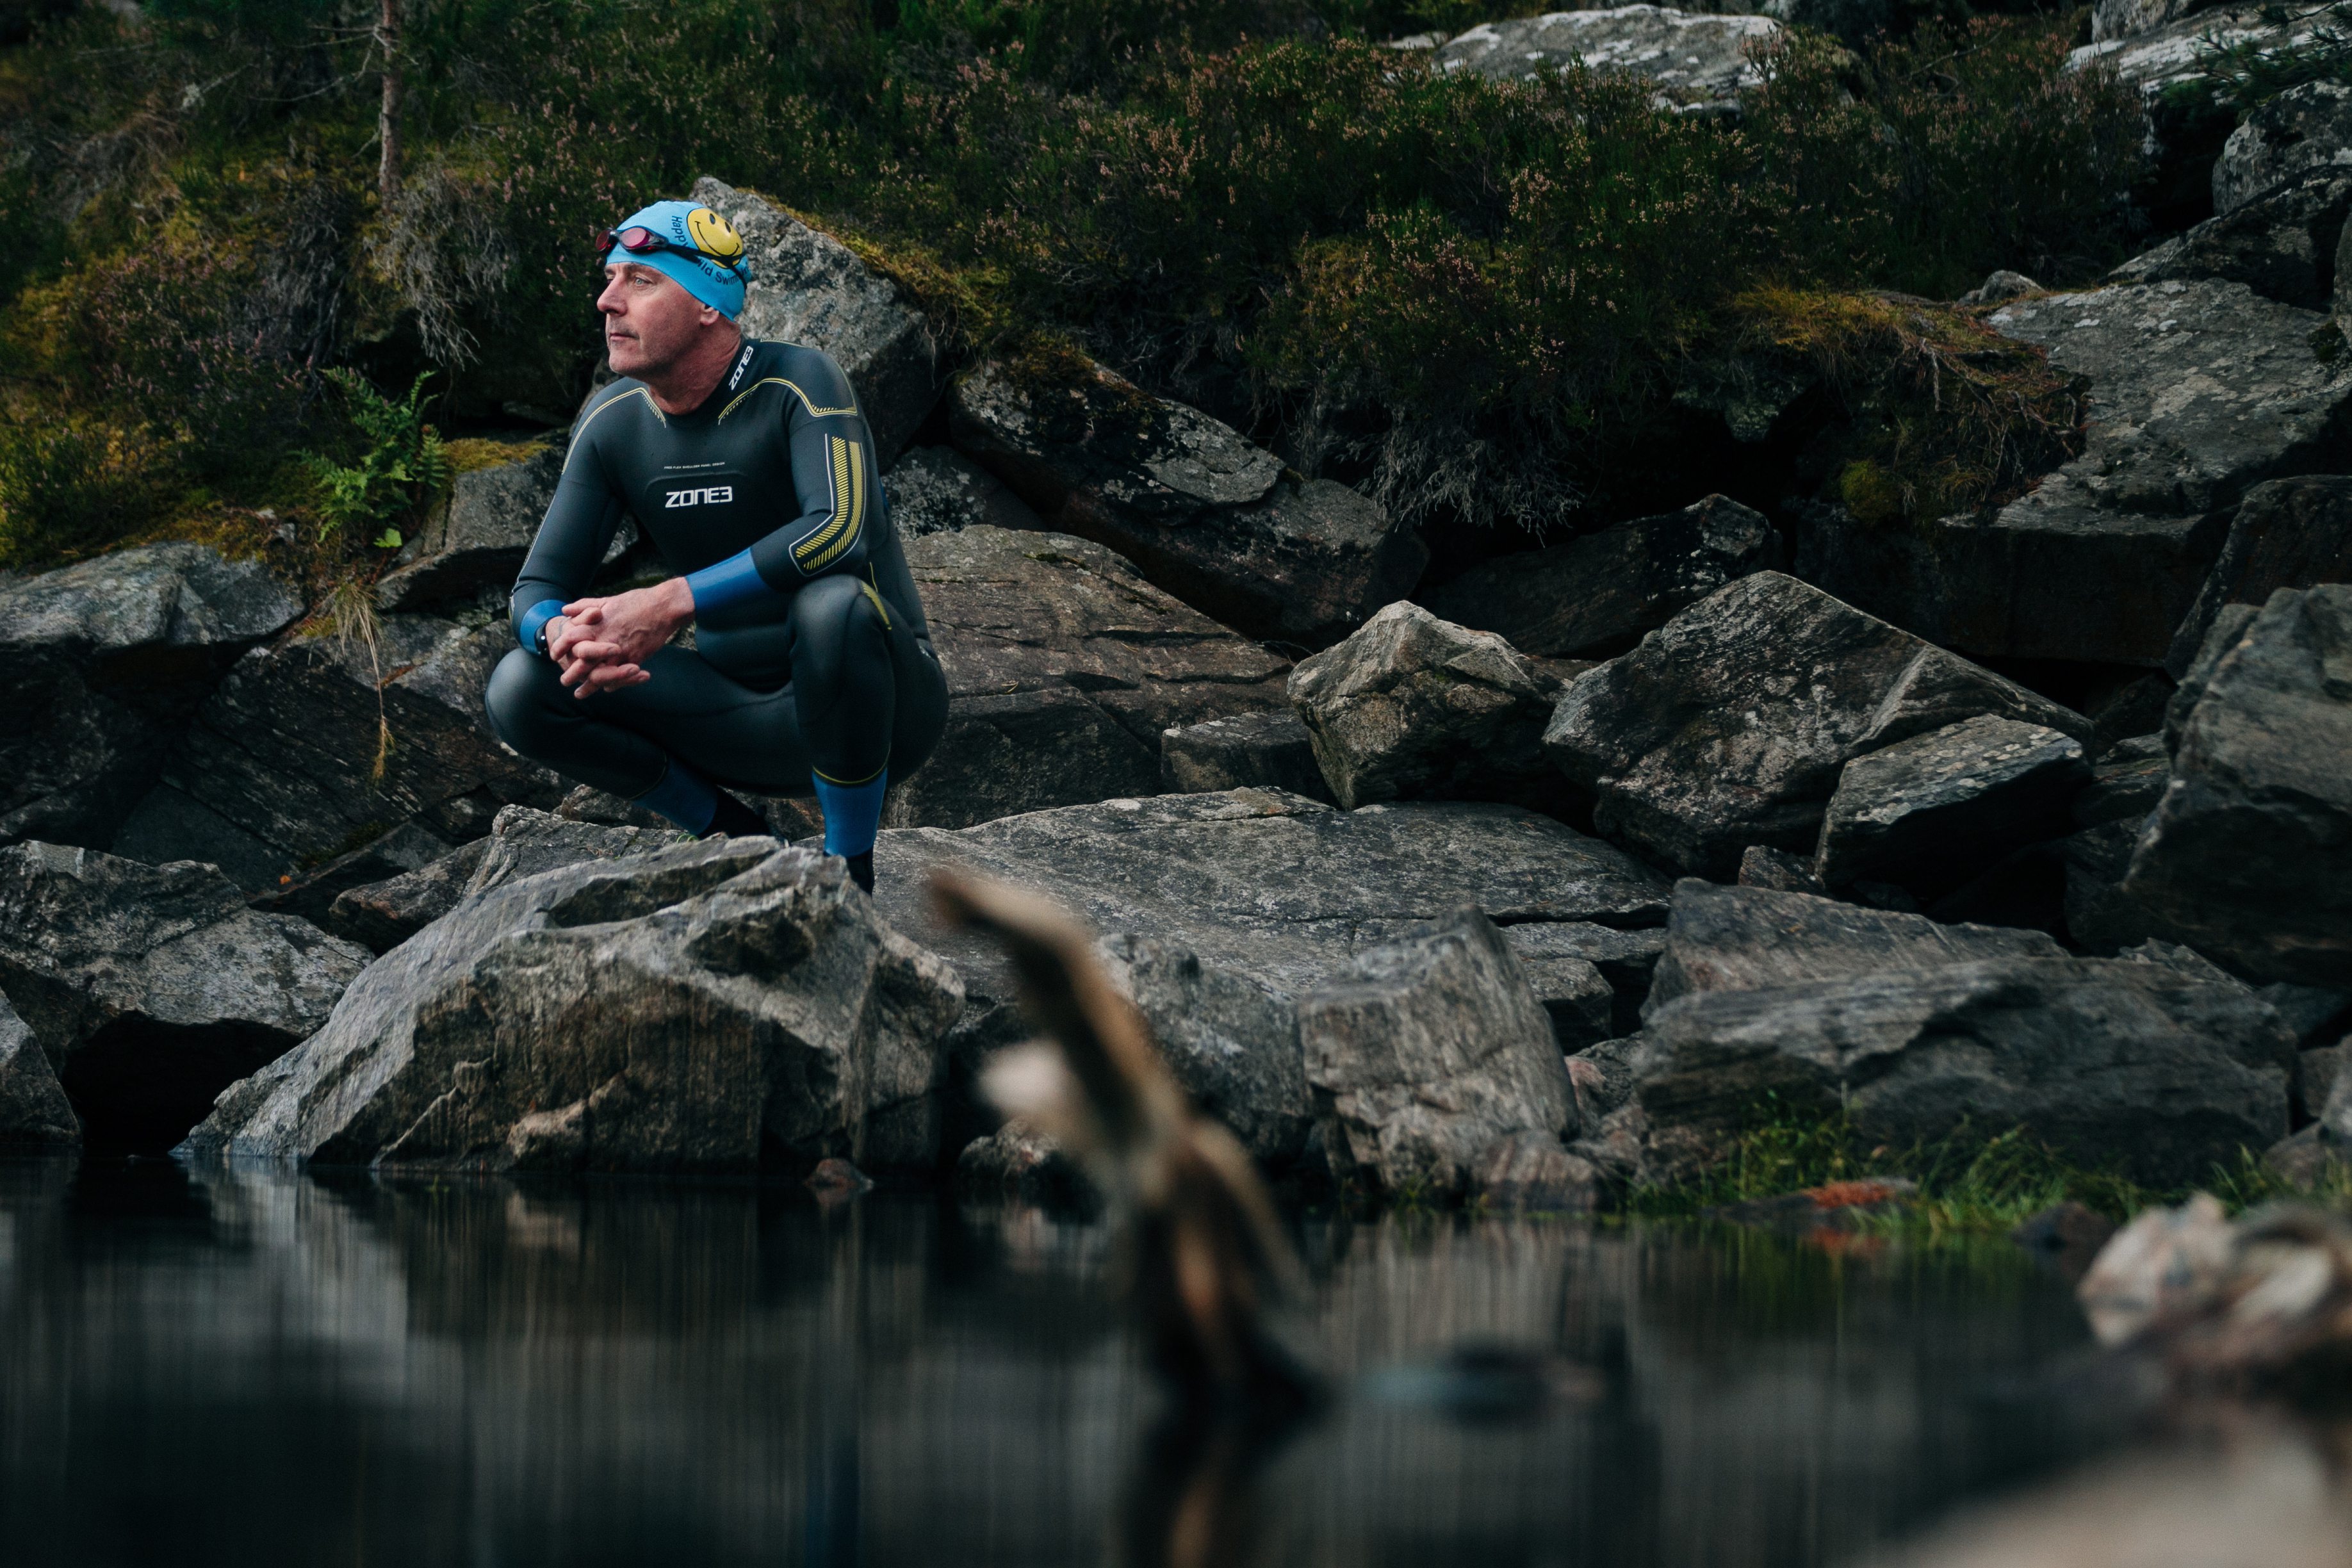 Outdoor wild swimming has had a huge benefit to Colin McKinnon's mental wellbeing